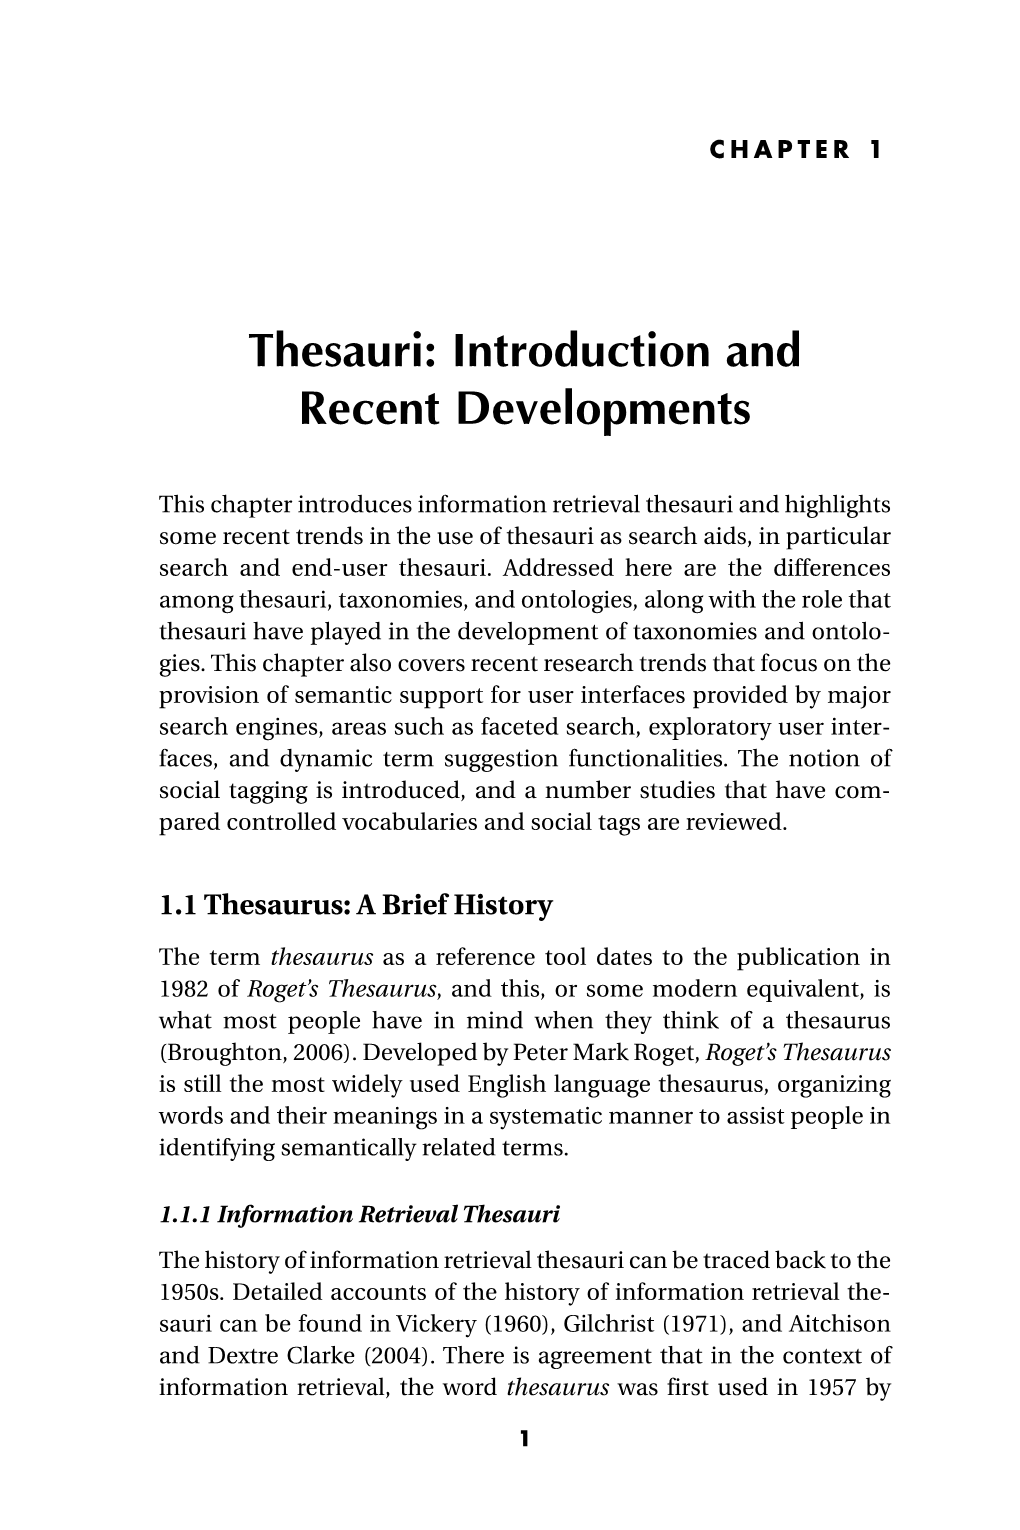 Thesauri: Introduction and Recent Developments